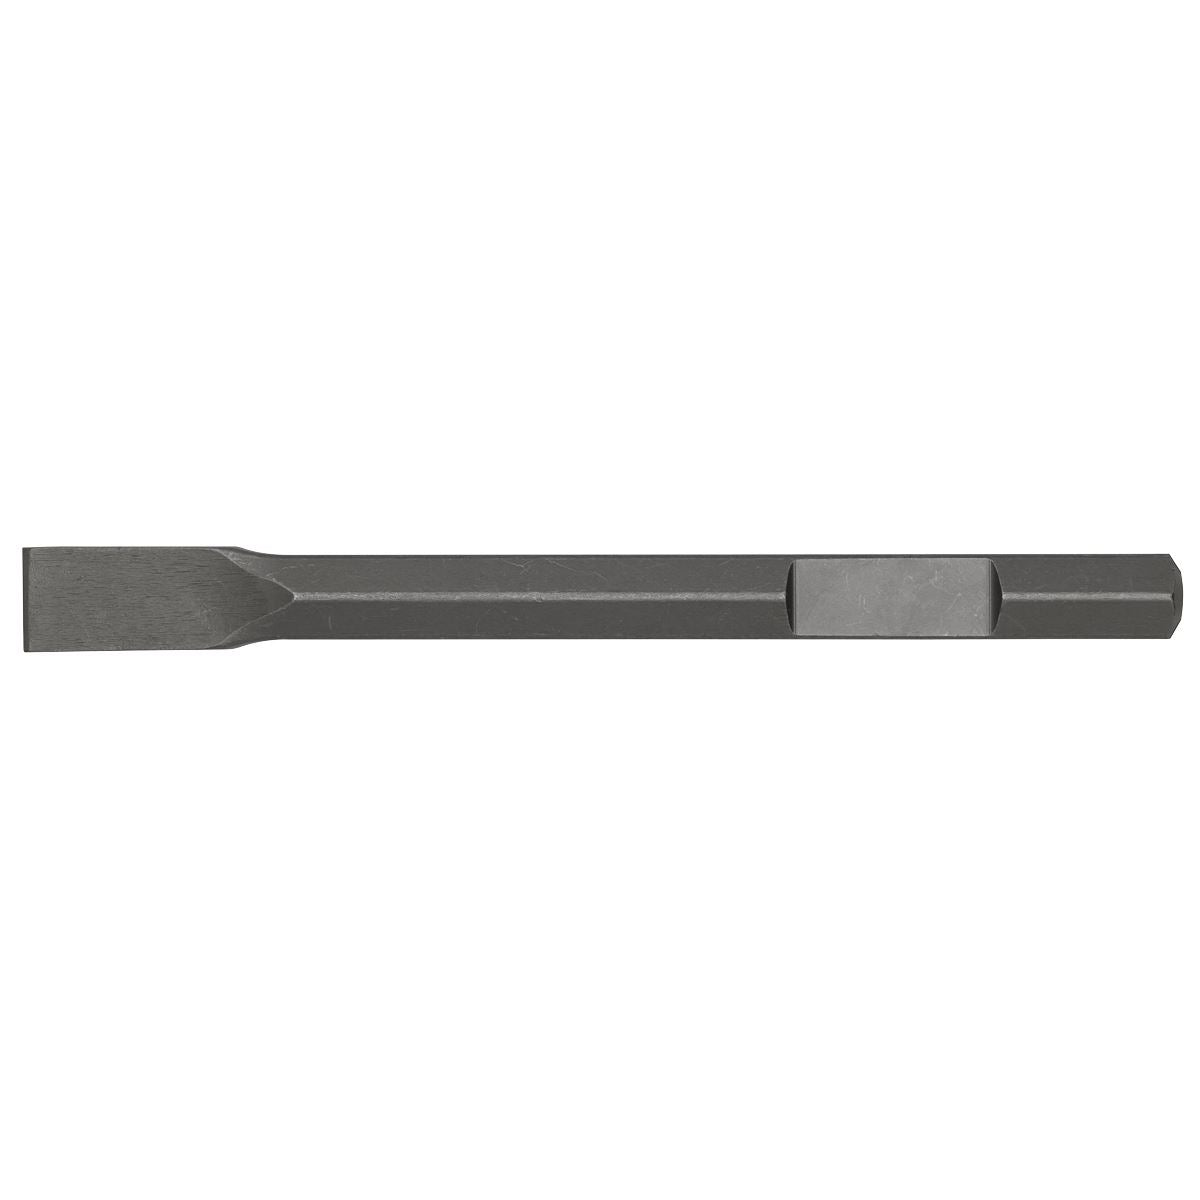 Worksafe by Sealey Chisel 30 x 375mm - Bosch 11304